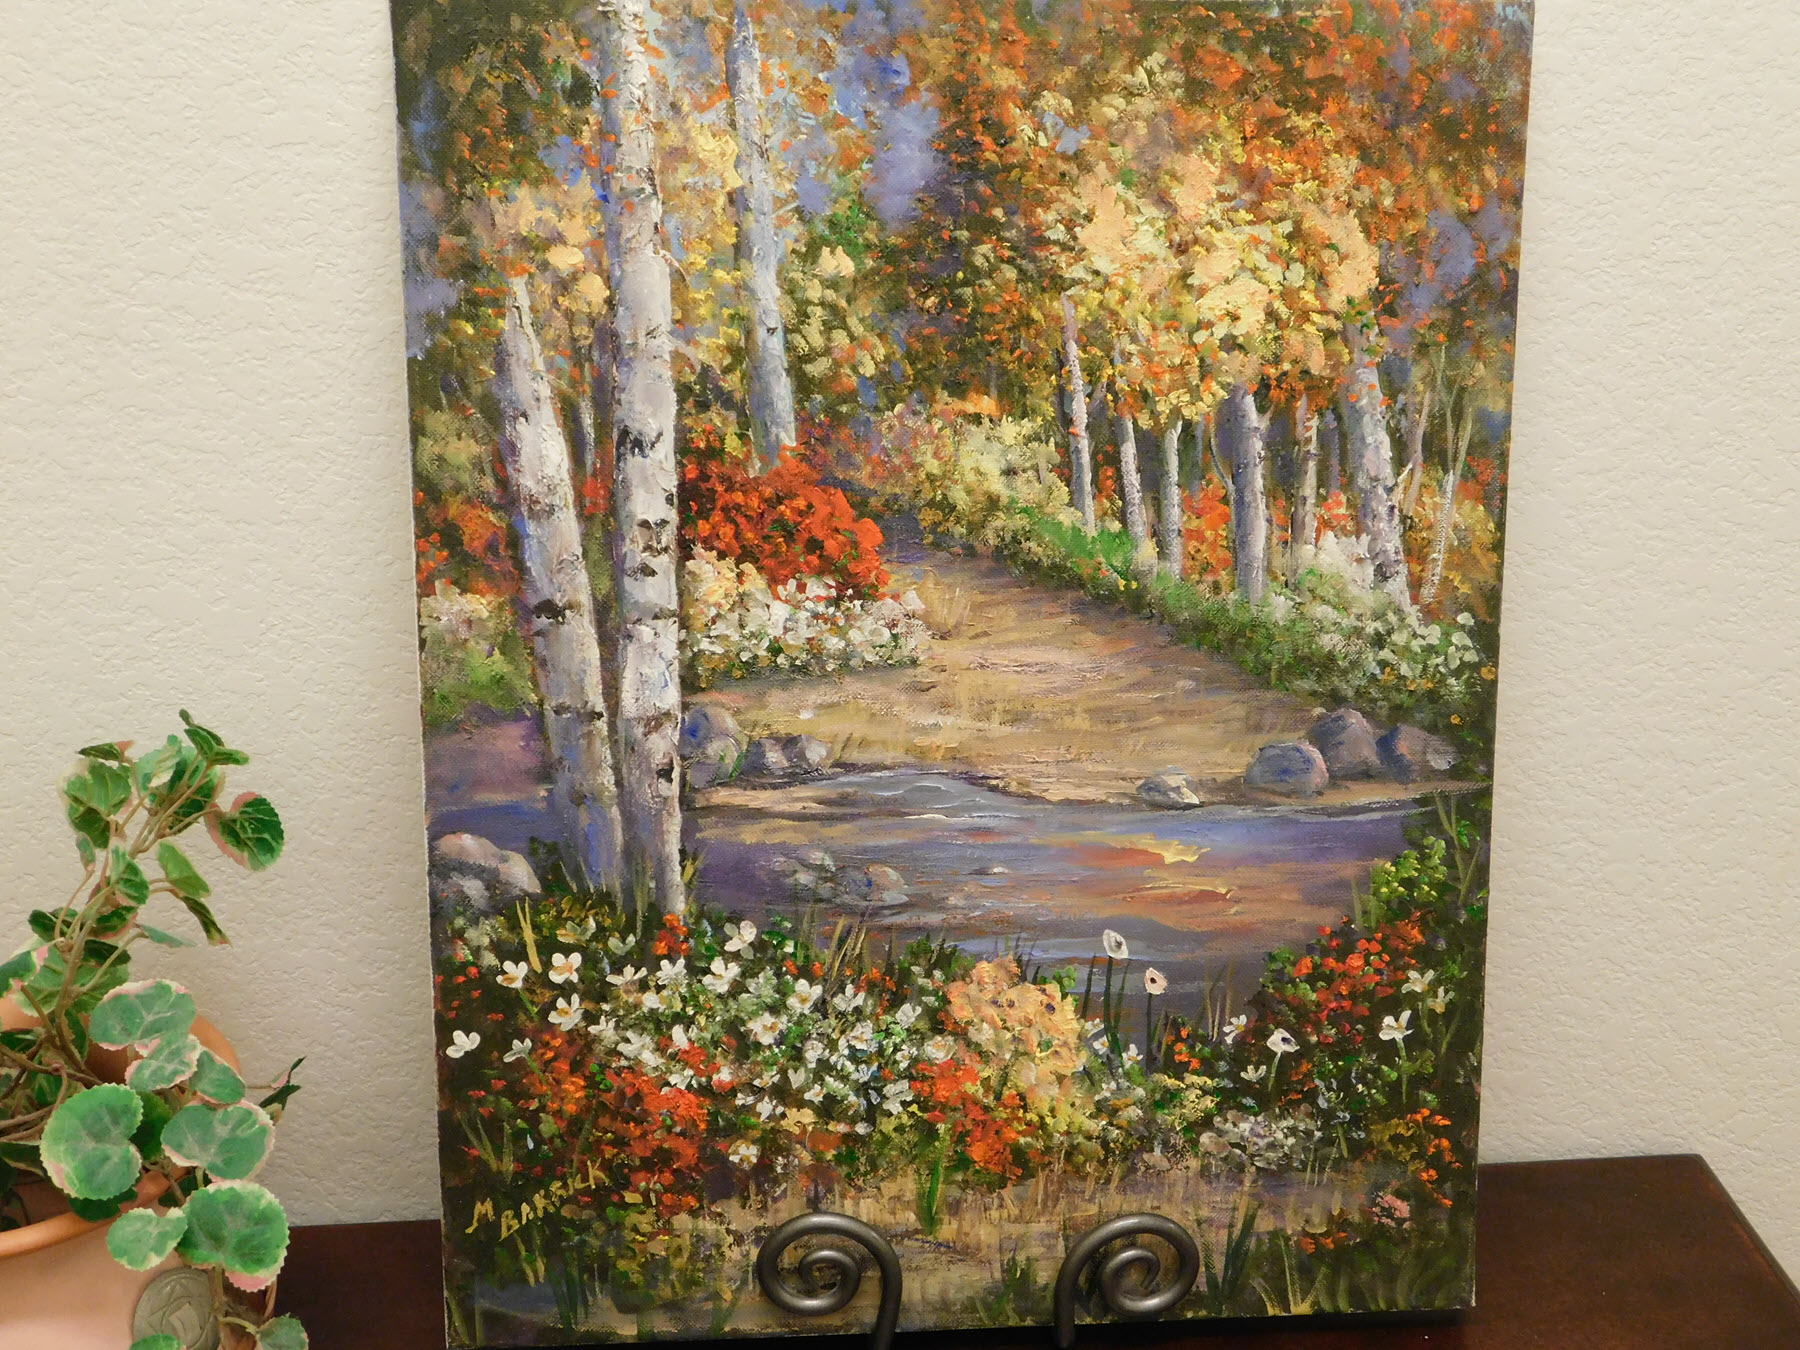 #27  "Springtime in the Mountains" 16x20 Not Framed